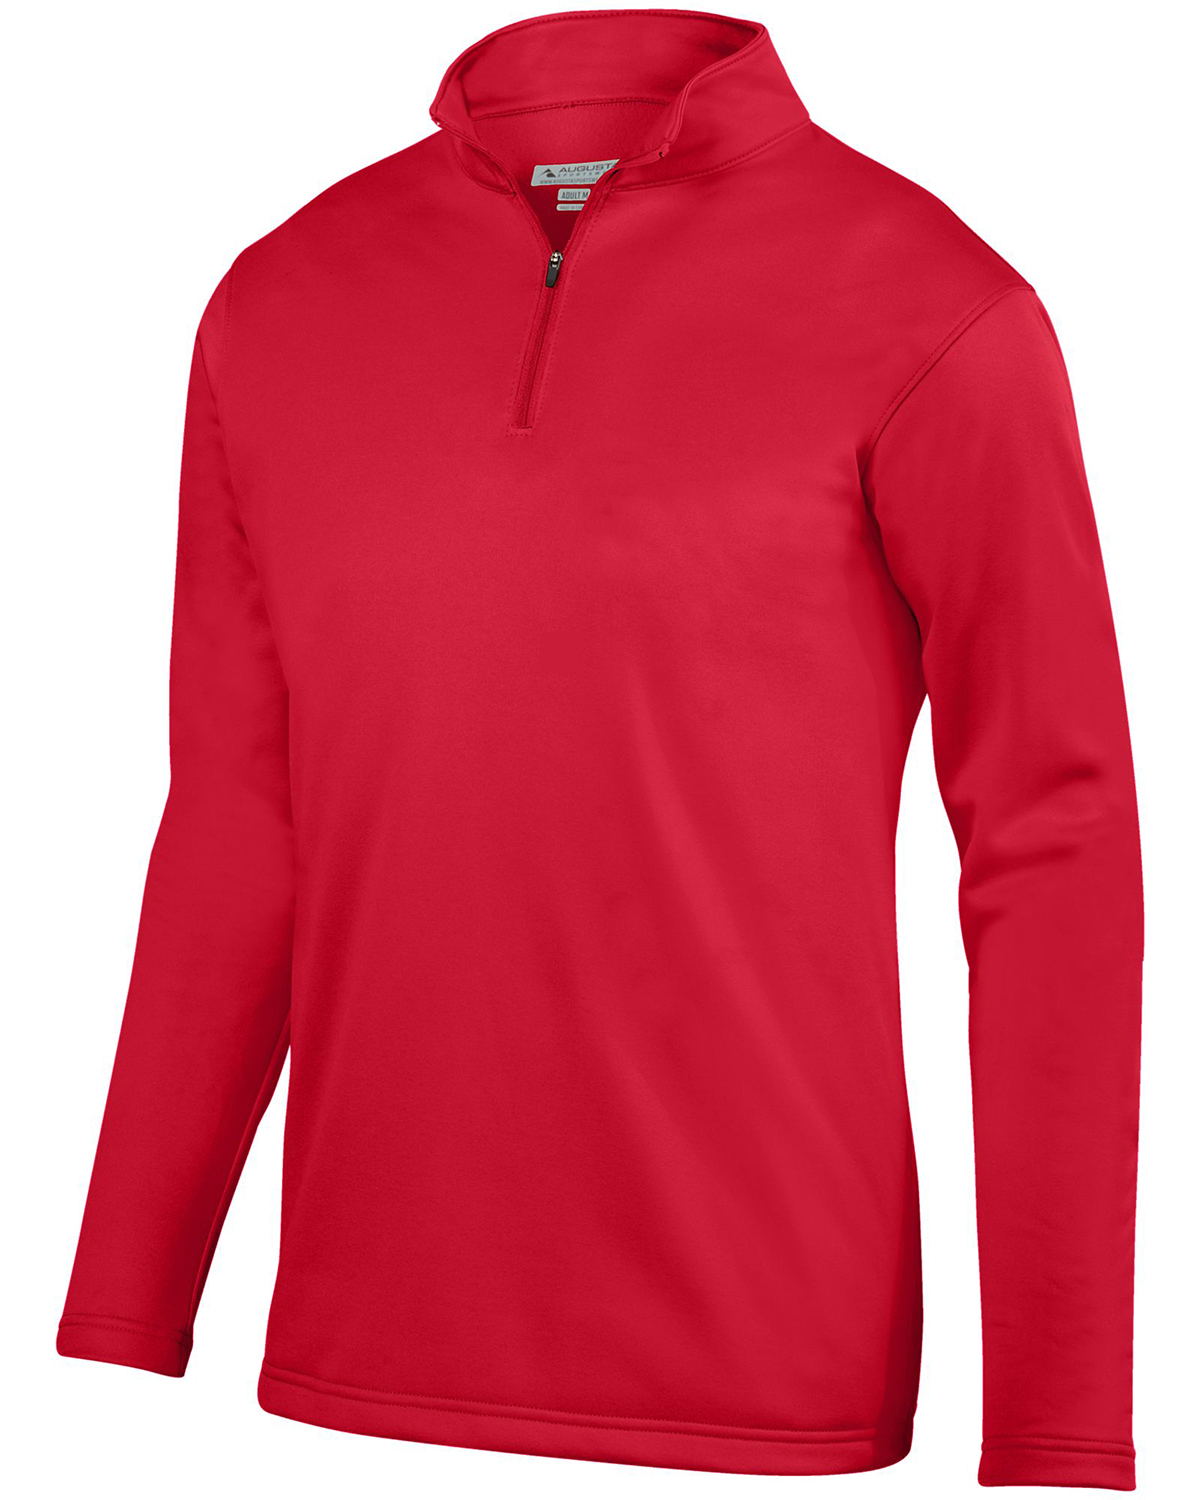 Power Pink Augusta Sports Youth Wicking Fleece Pullover Large 